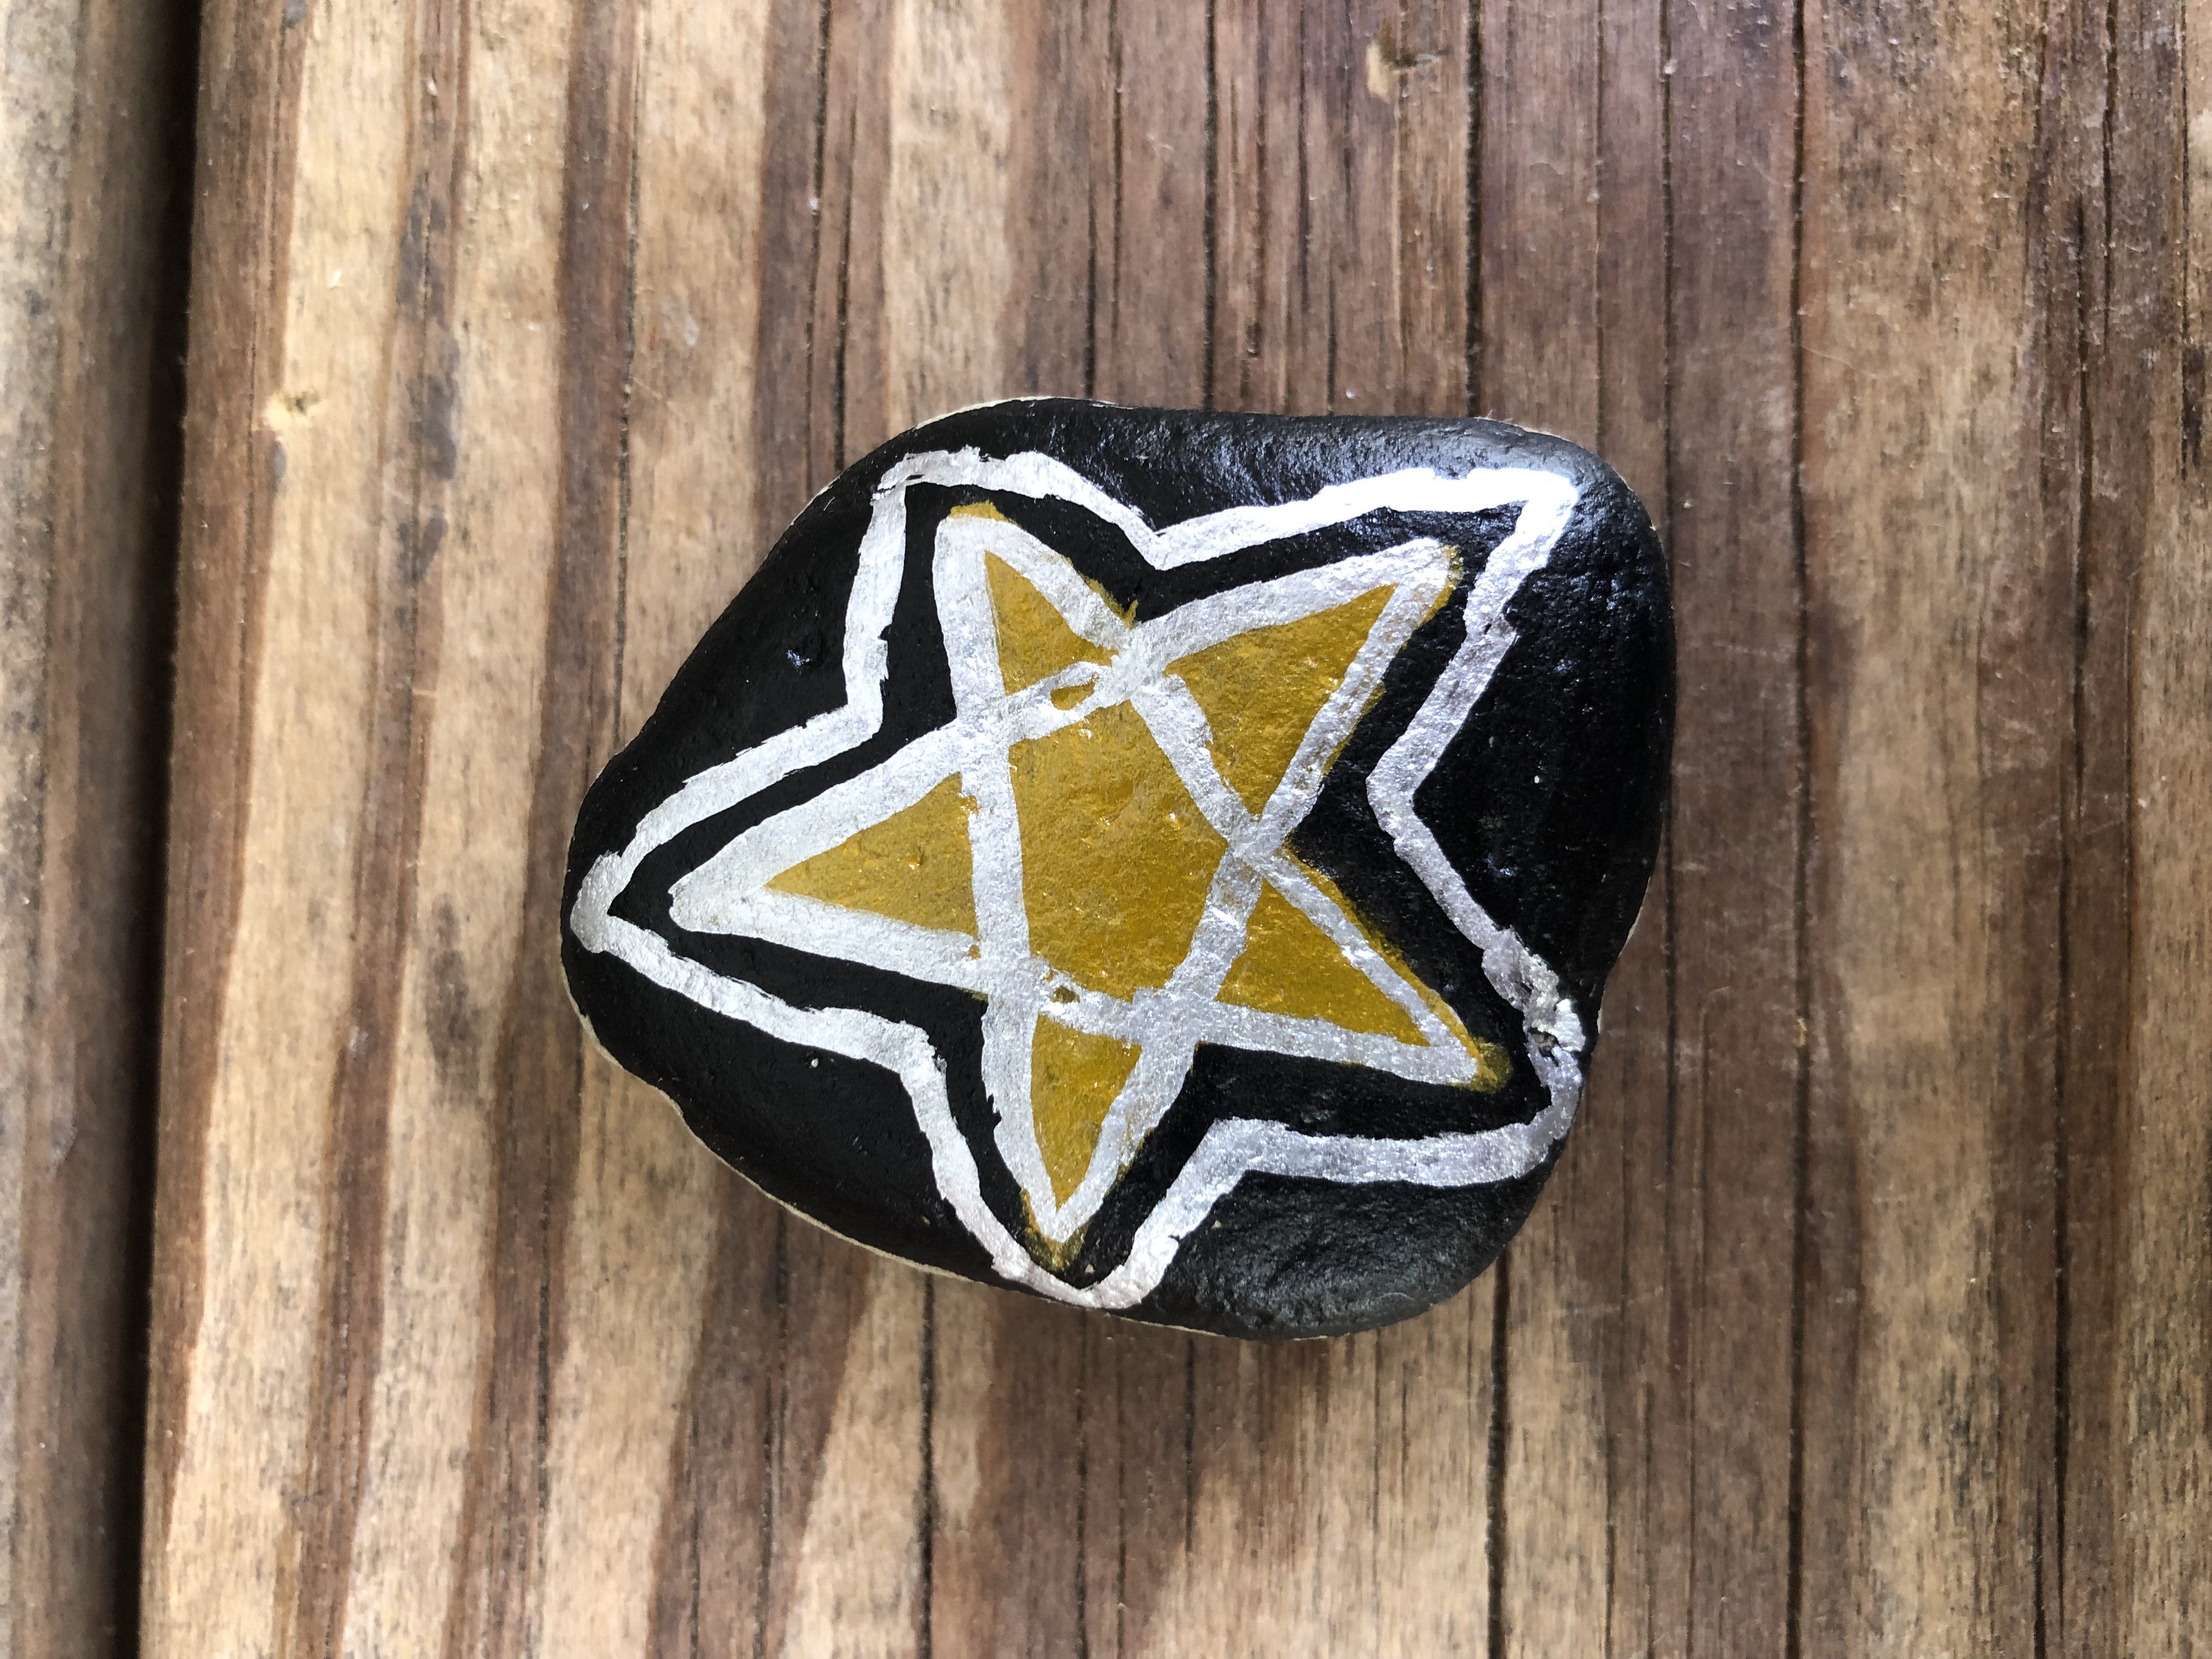 Painted Star rock